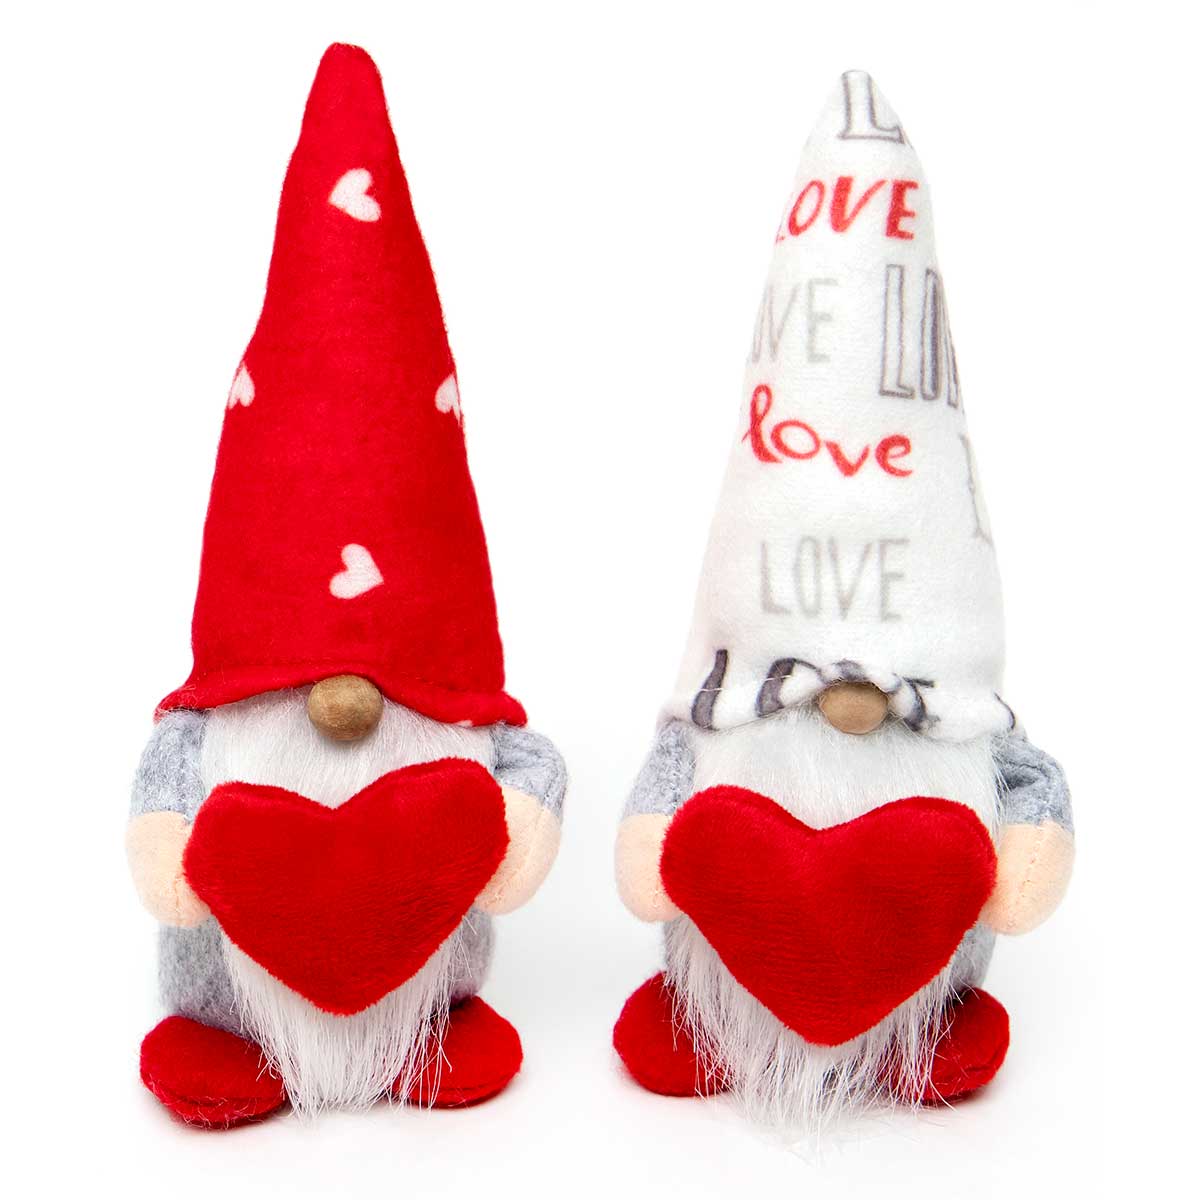 !Luv Gnome with Big Heart, Wood Nose 6"